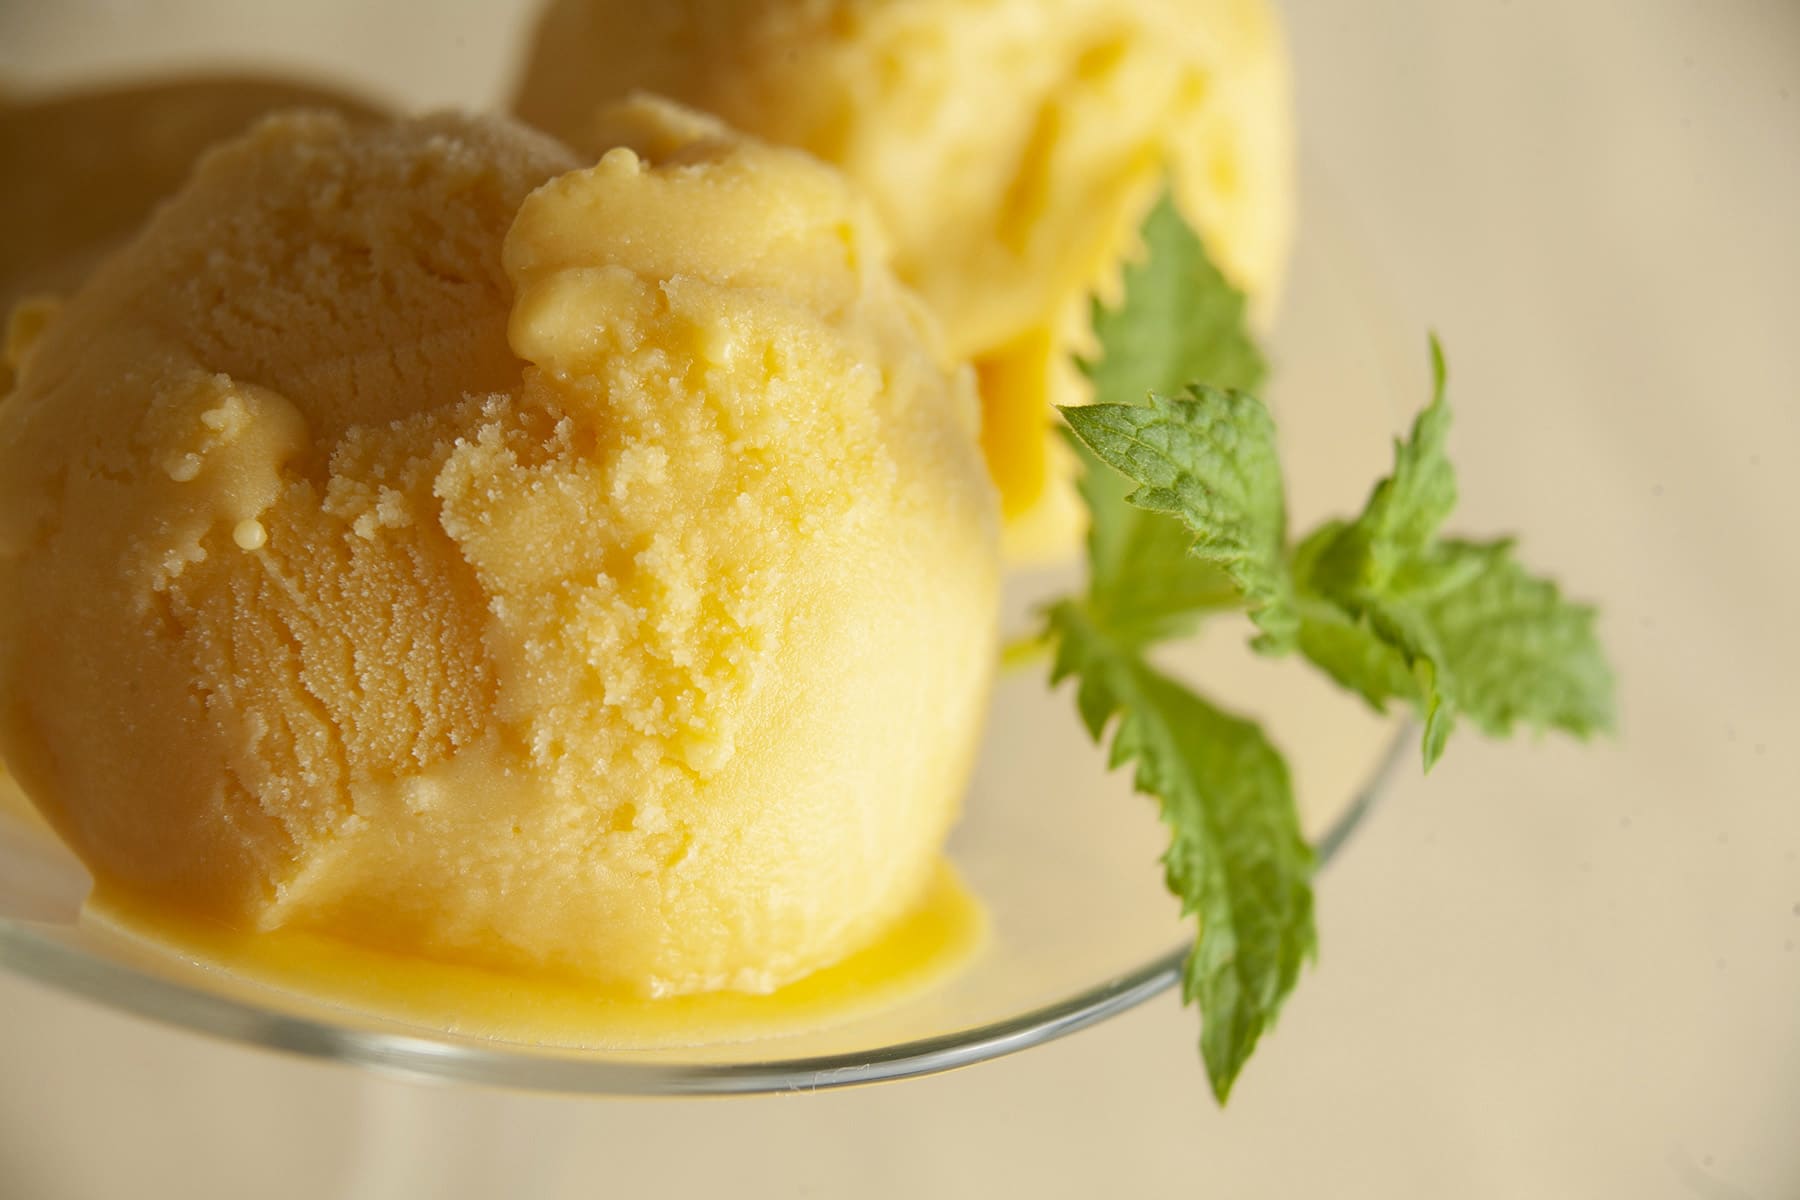 Two scoops of a rich yellow mango mojito ice cream, in a martini glass.  It's garnished with a sprig of fresh mint.